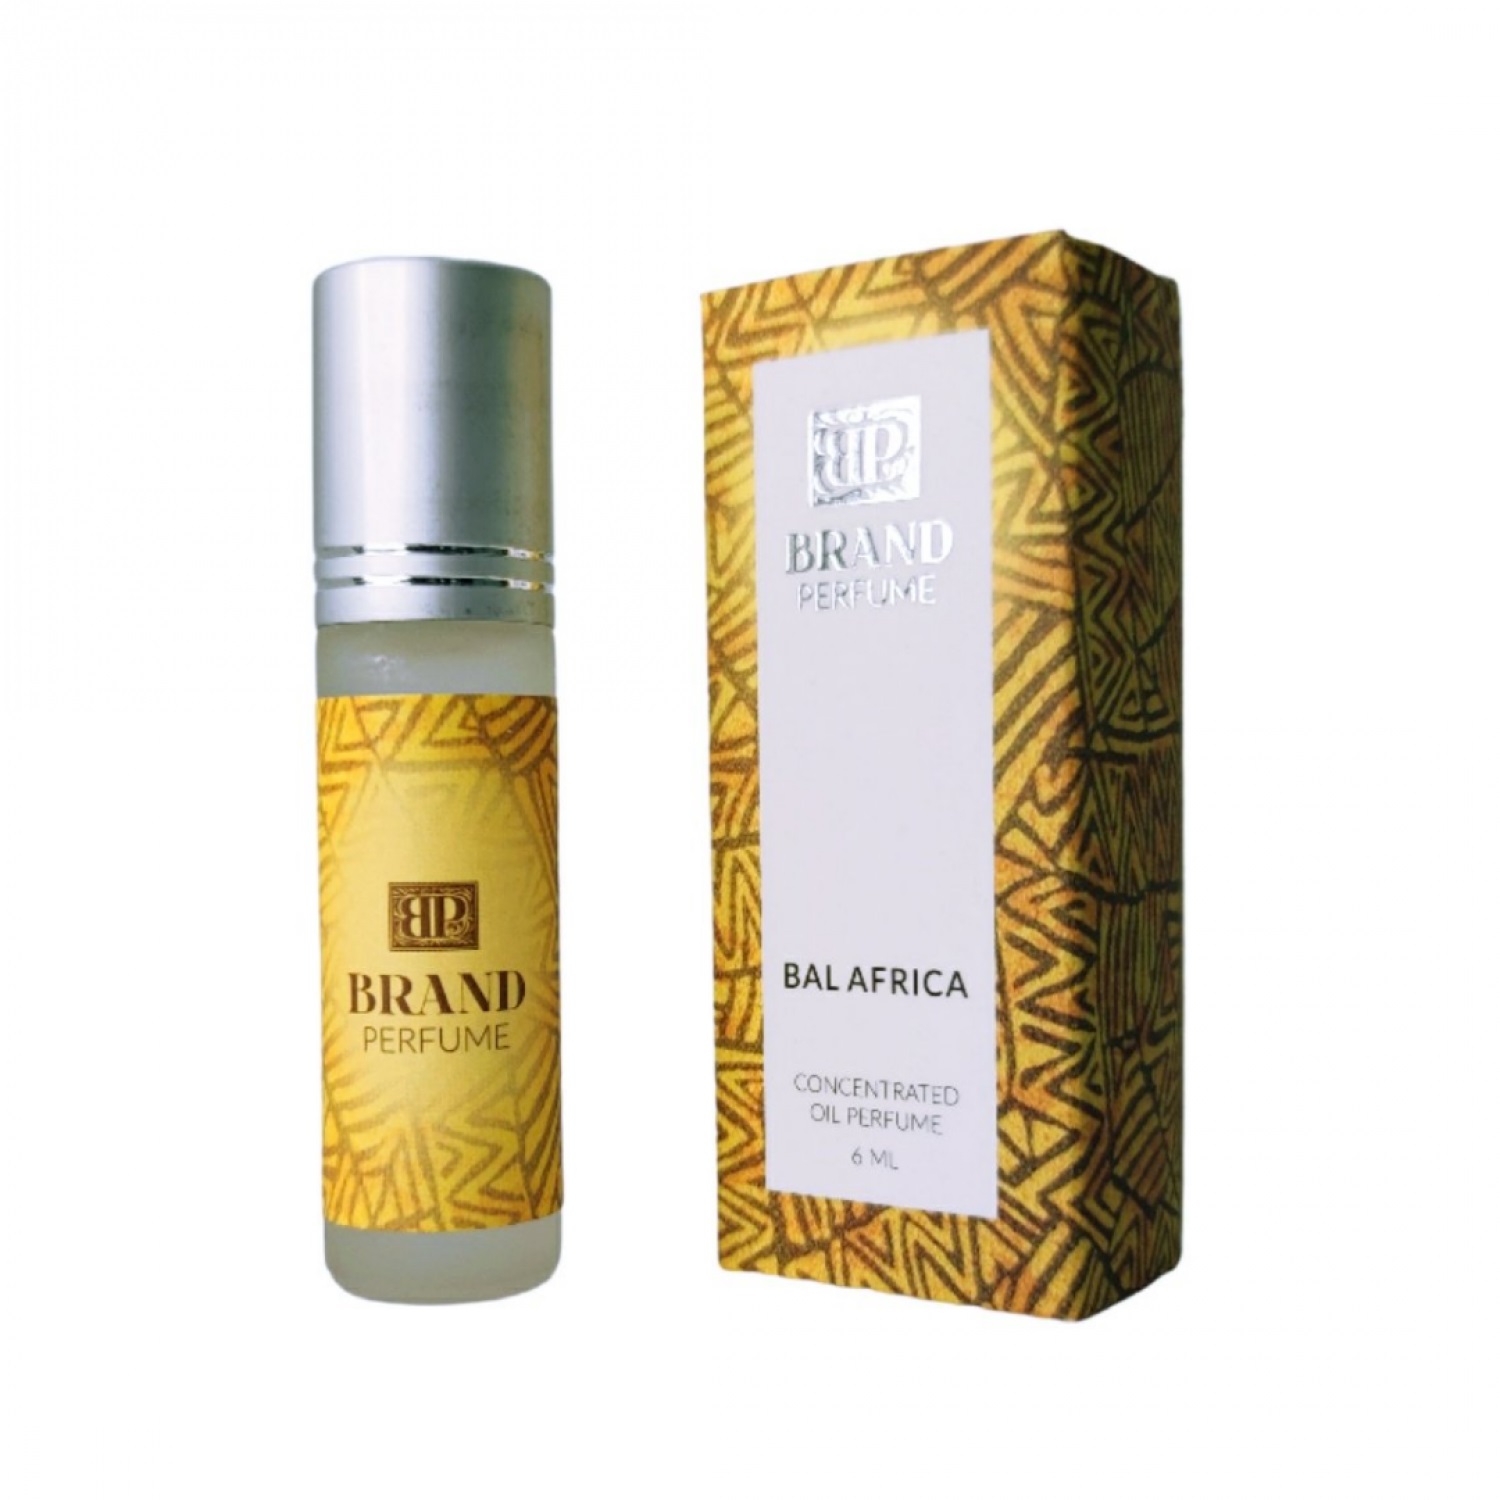 BAL AFRICA Concentrated Oil Perfume, Brand Perfume (Концентрированные масляные духи), ролик, 6 мл.